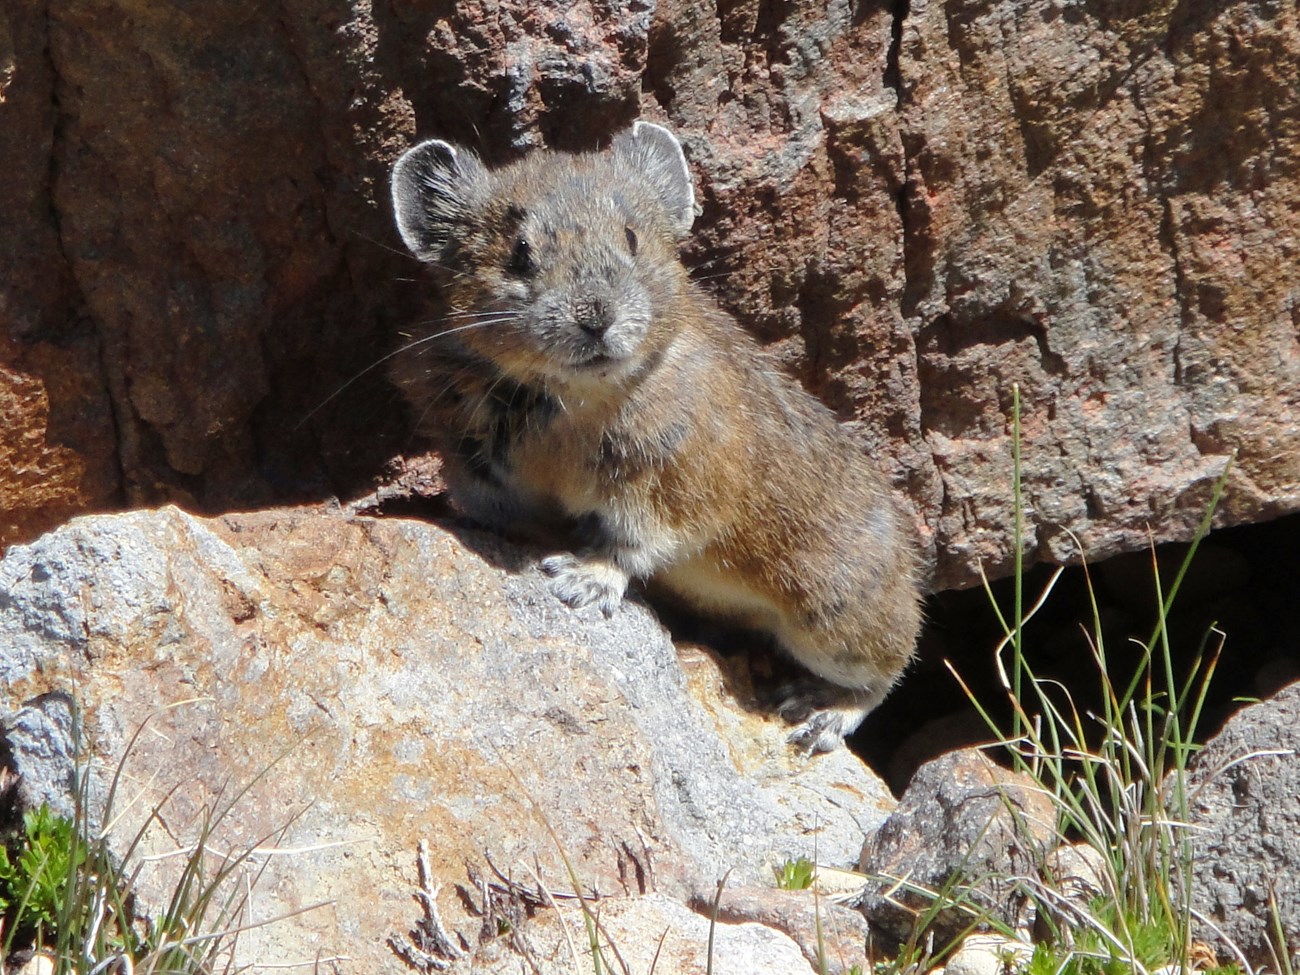 American pika on a rock, its head turned towards the camera